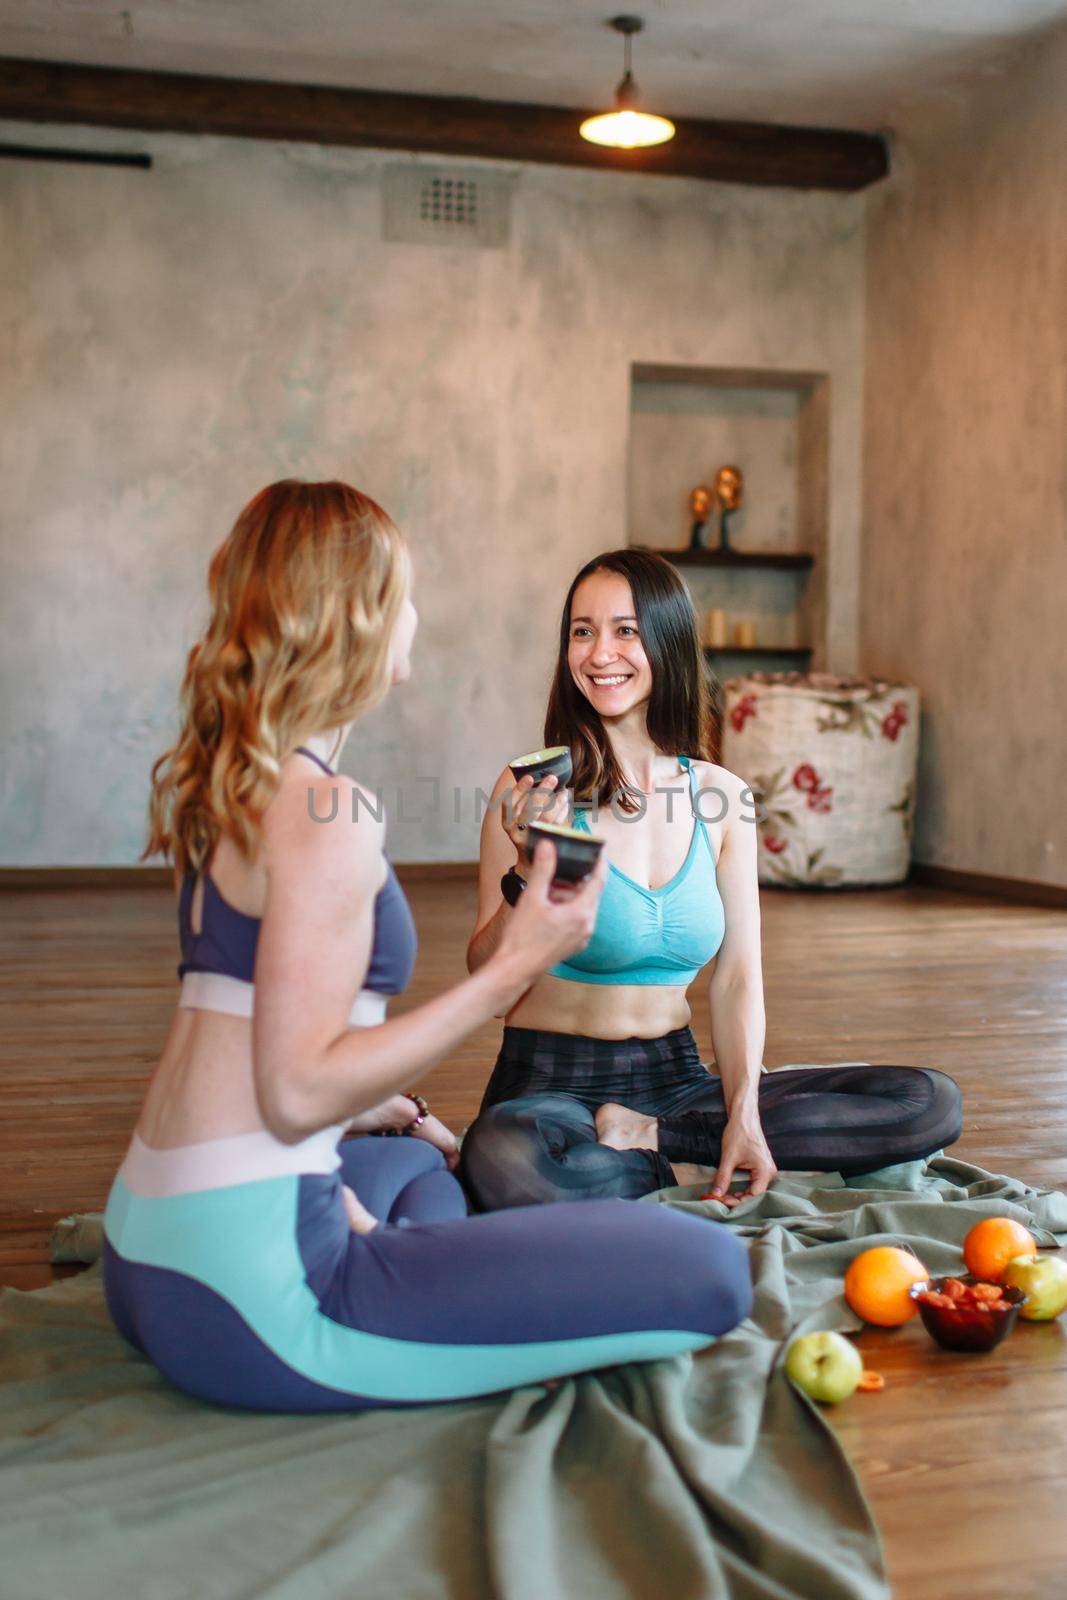 Conversation and tea party of yogis in the loft by deandy